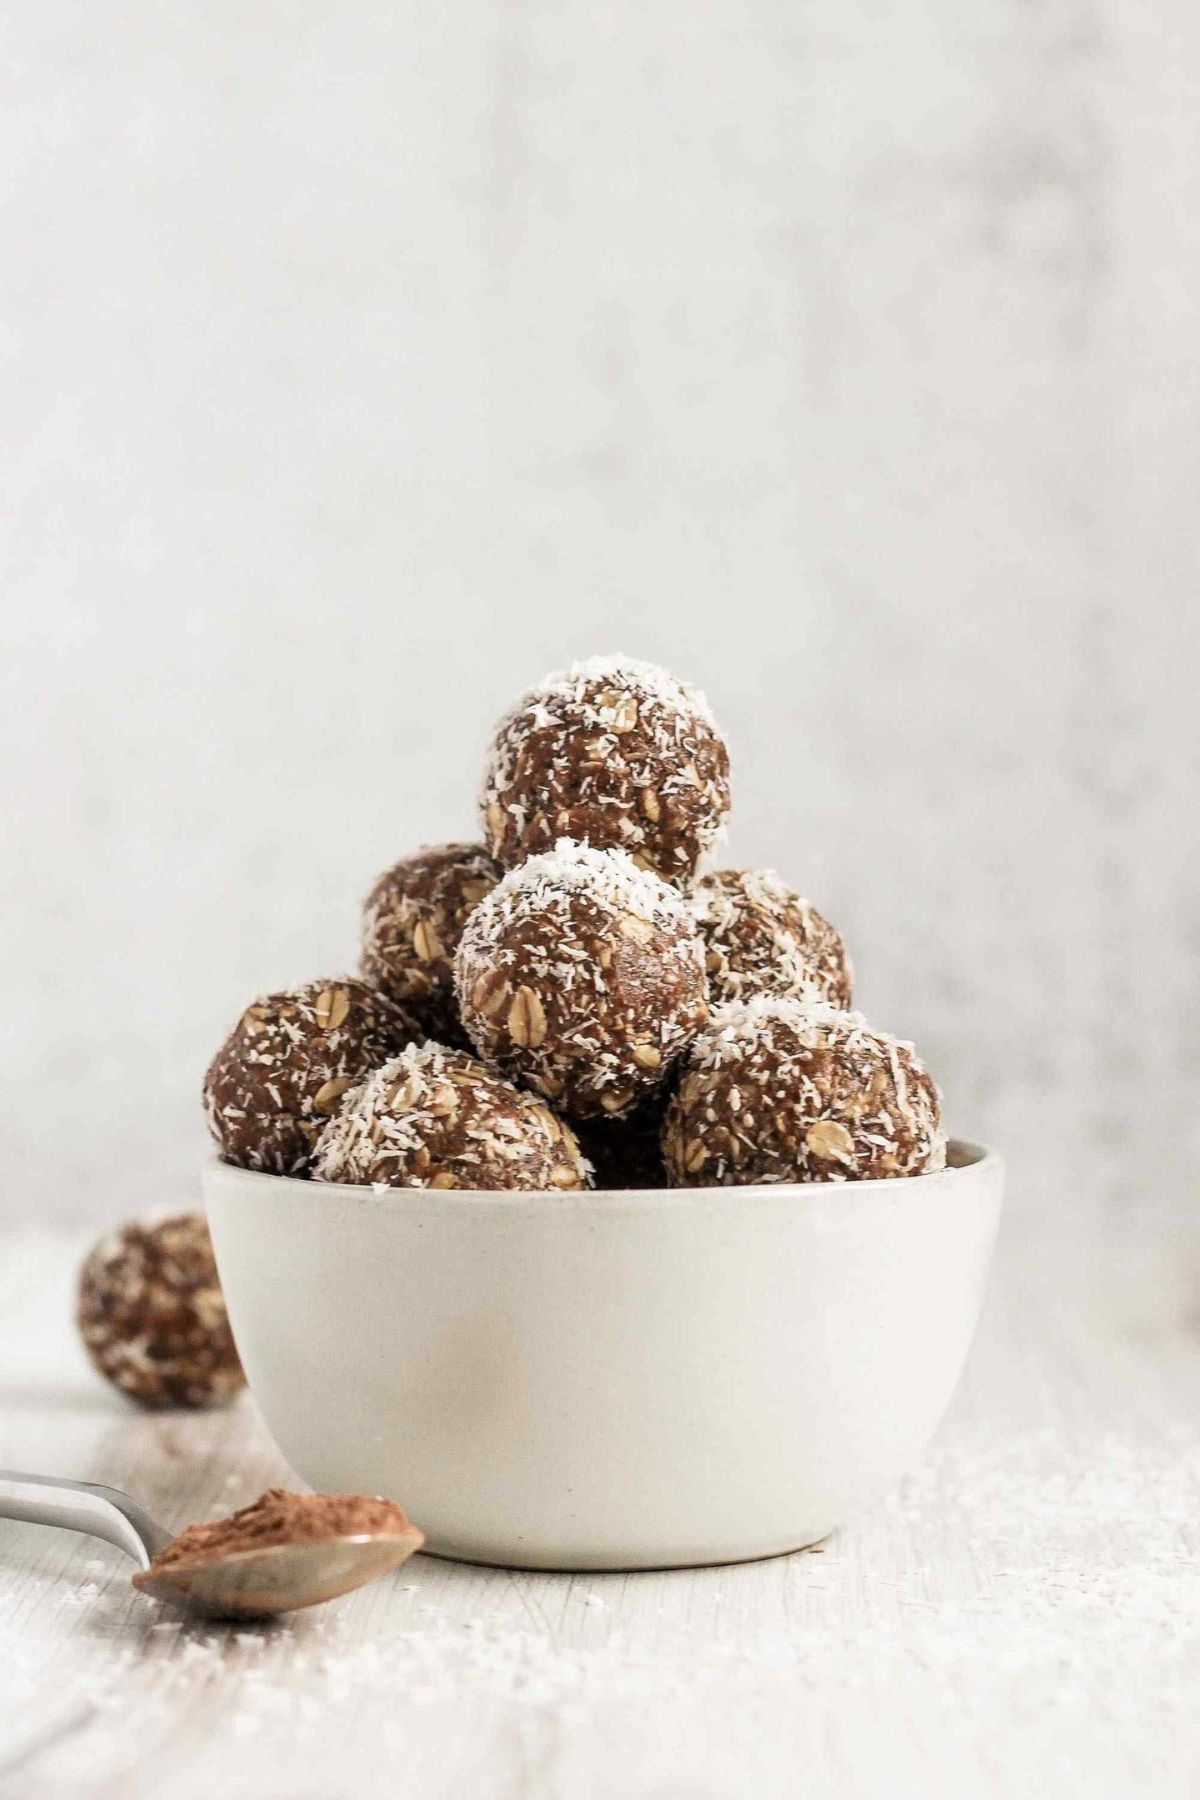 Chocolate peanut butter balls sprinkled with coconut flakes stacked in a small white bowl.